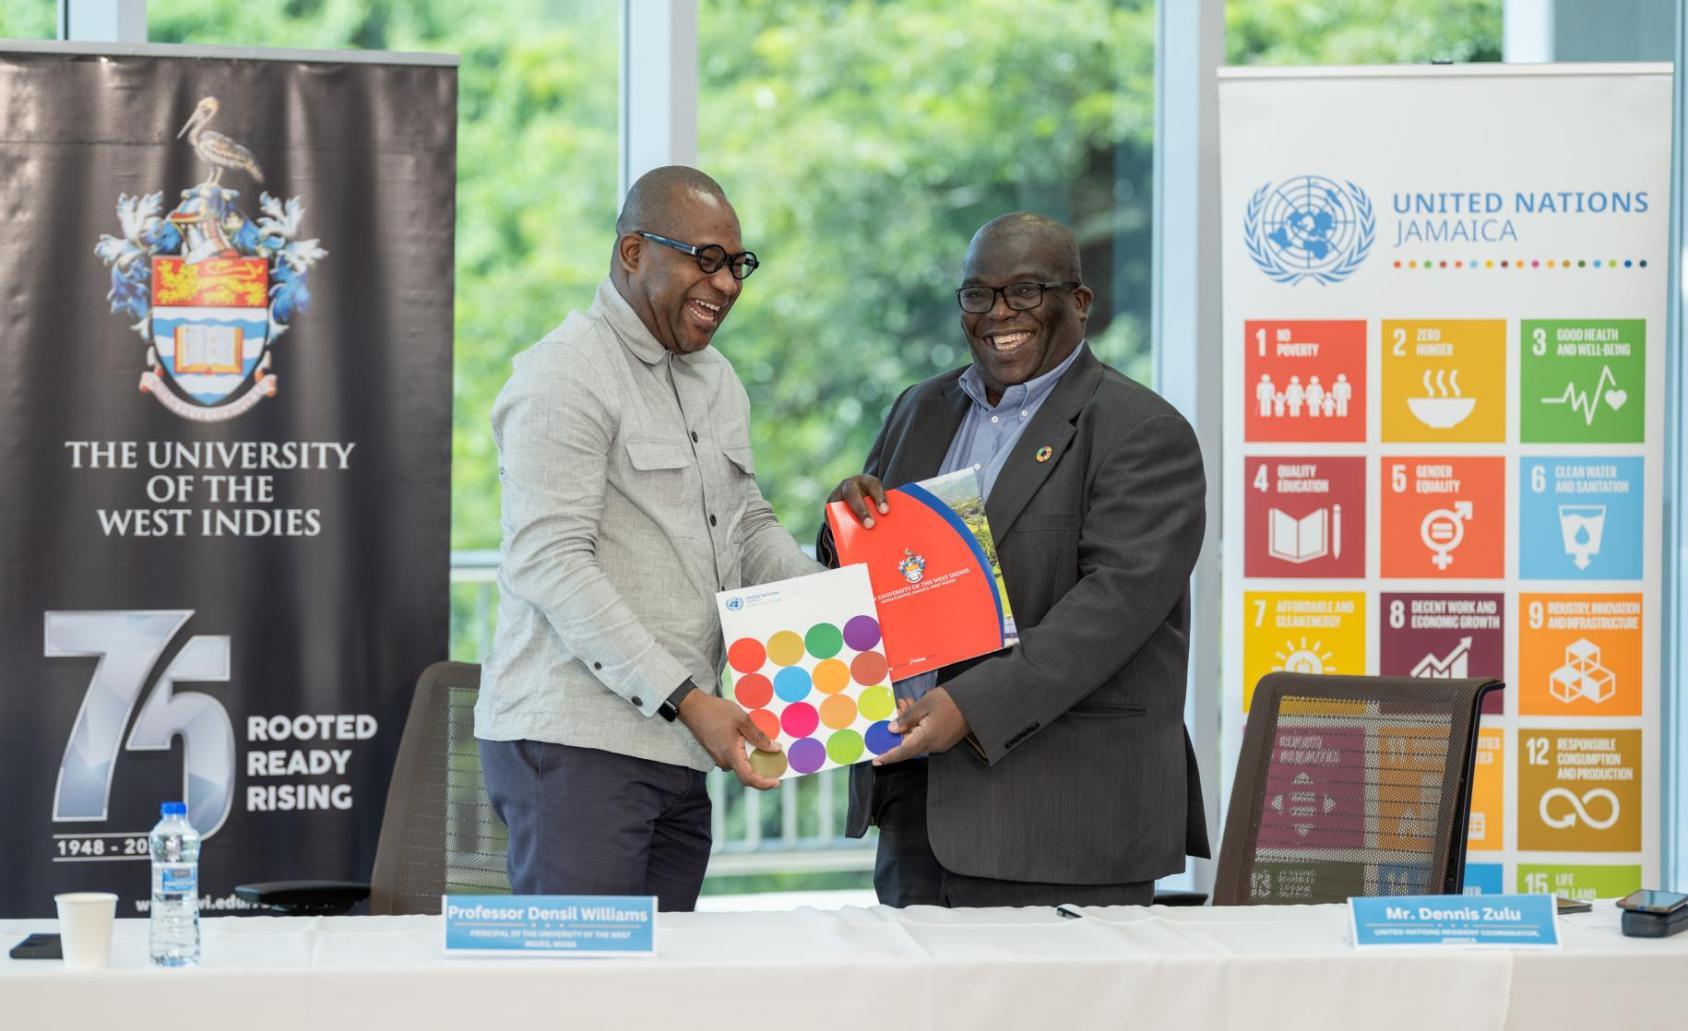 Two men in suits smiling and shaking hands while holding colourful reports on SDGs